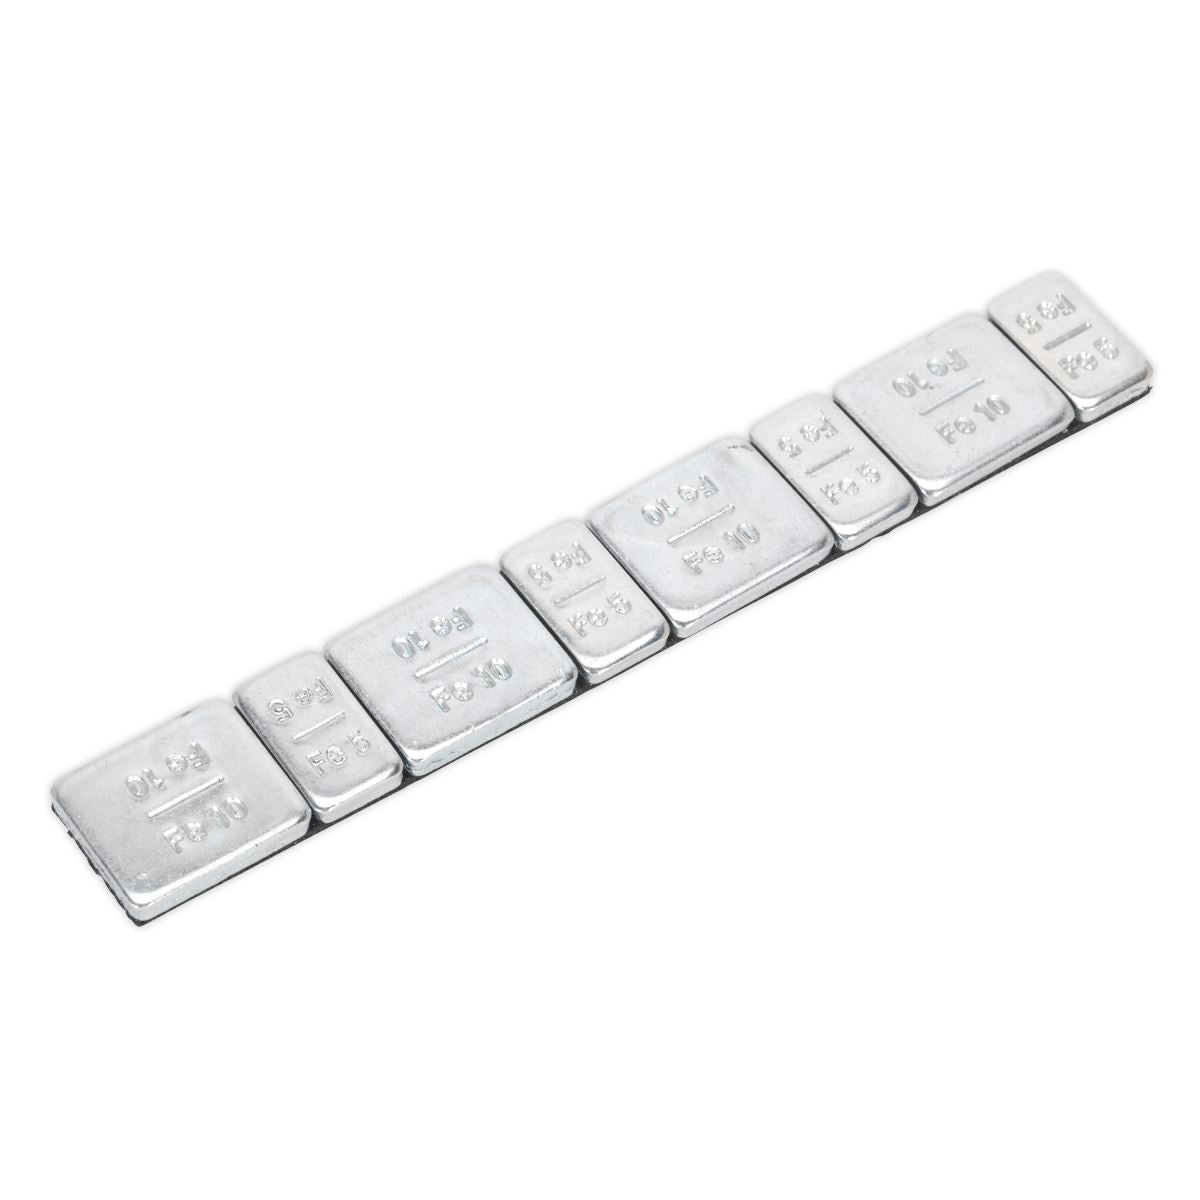 Sealey Wheel Weight 5 & 10g Adhesive Zinc Plated Steel Strip of 8 (4 x Each Weight) Pack of 100